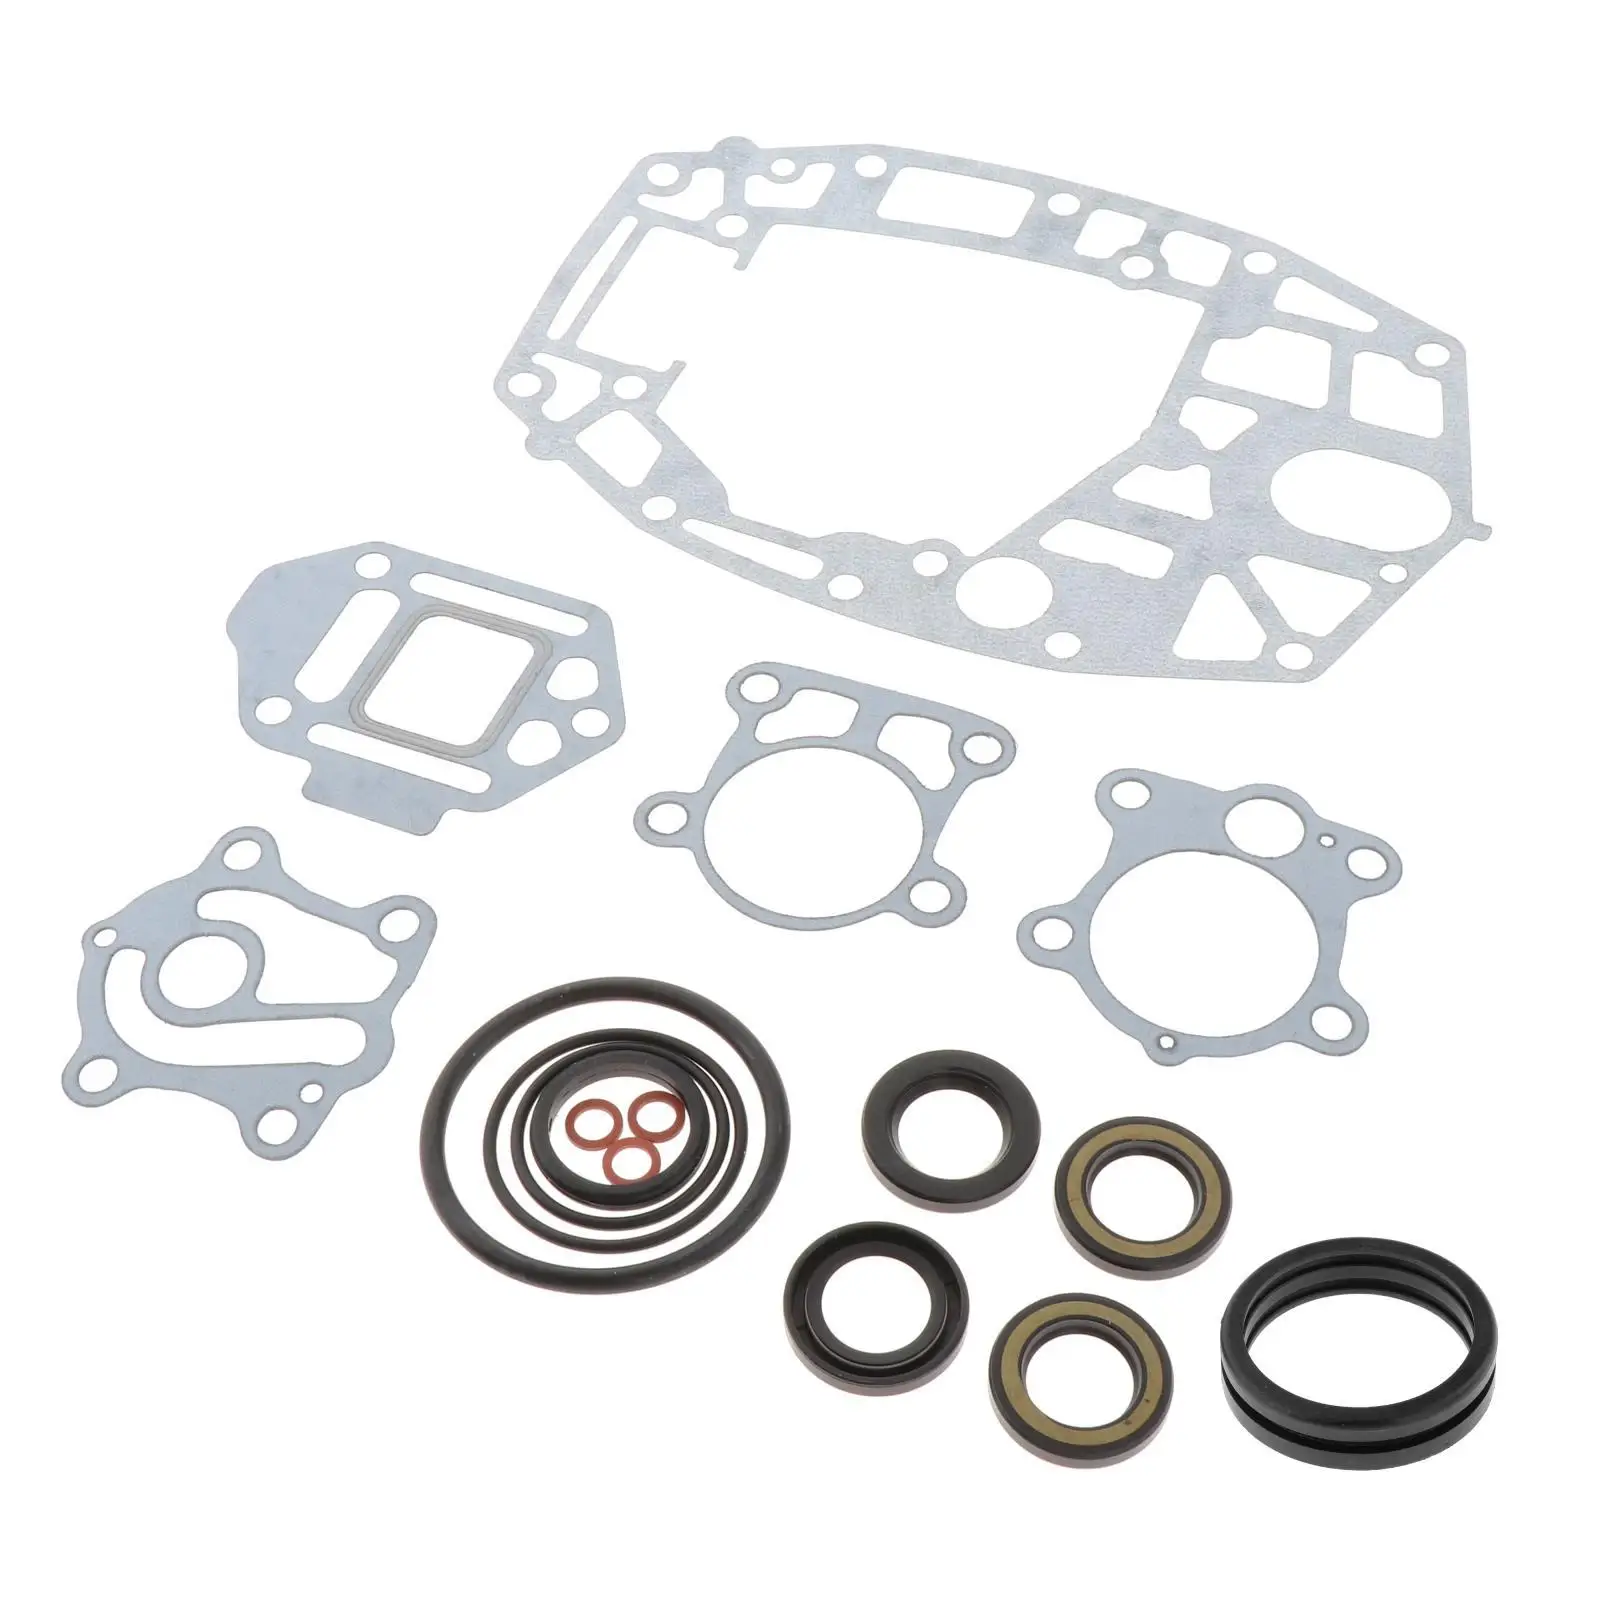 6H4-W0001-20-00 Lower Unit Seal Kit 18-2792 Fit for Yamaha Parts Oil Seal